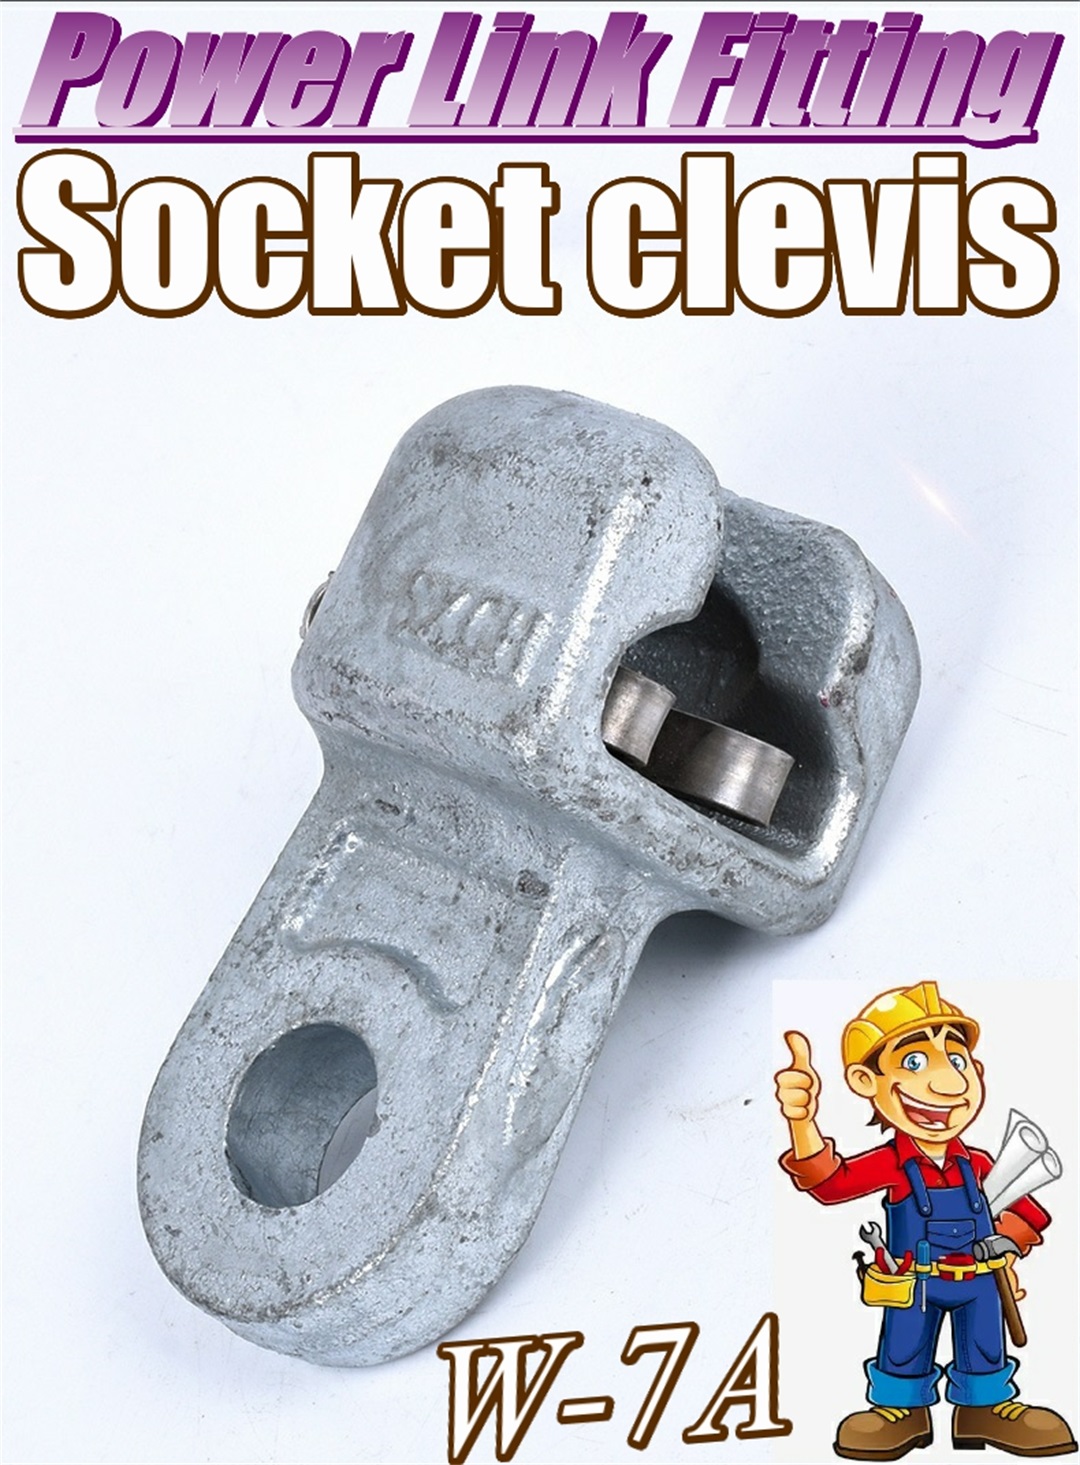 Socket clevis Power rohy fitting